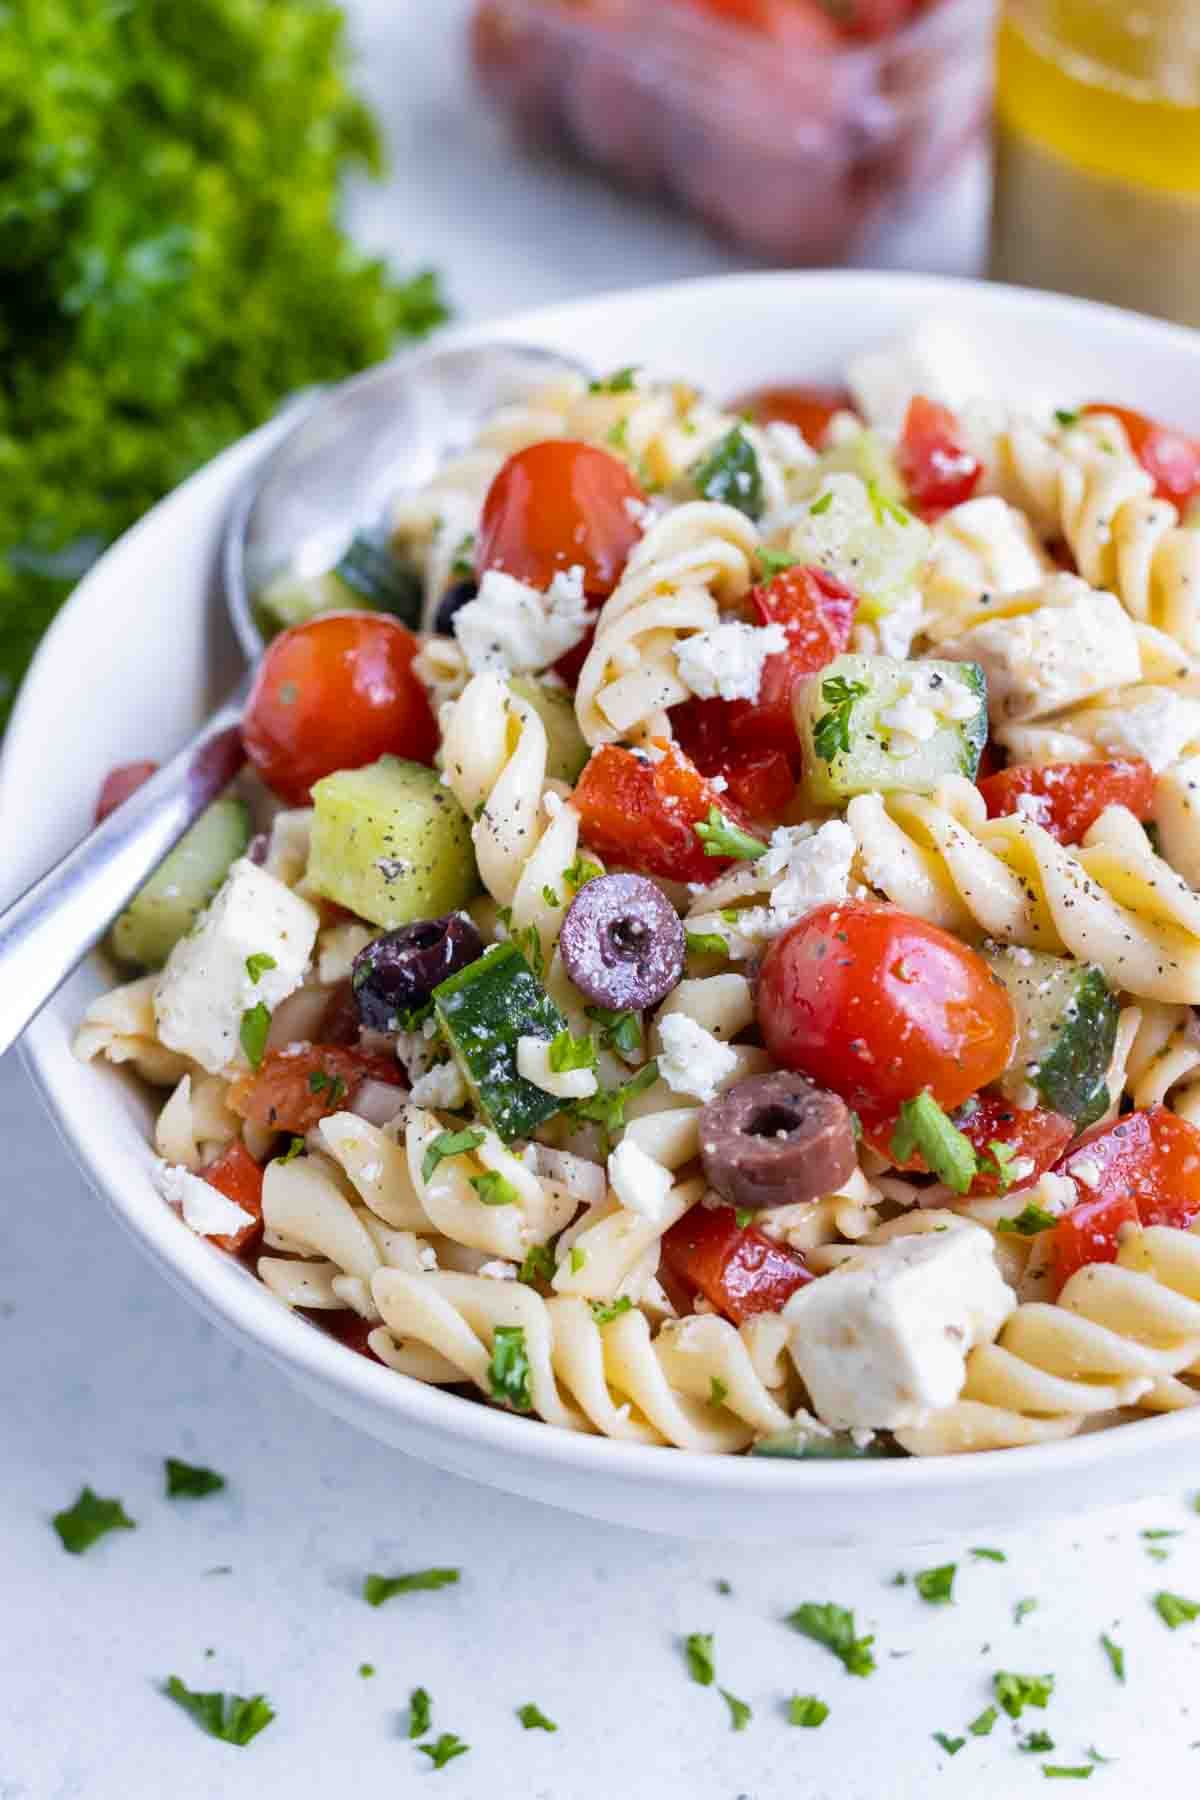 Pasta salad is shown in a white bowl for a gluten-free side.